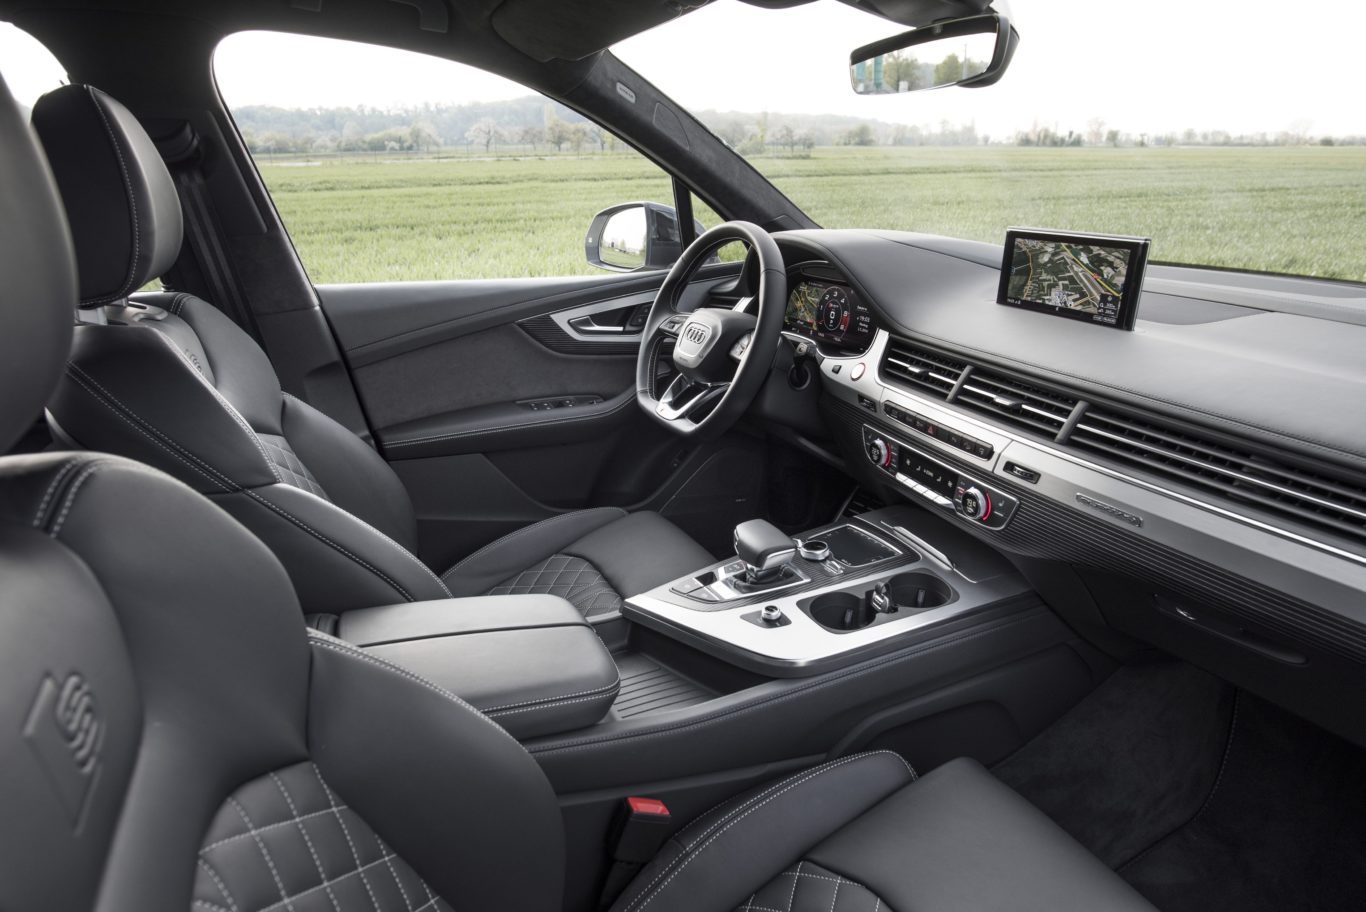 The interior of the SQ7 is solidly made